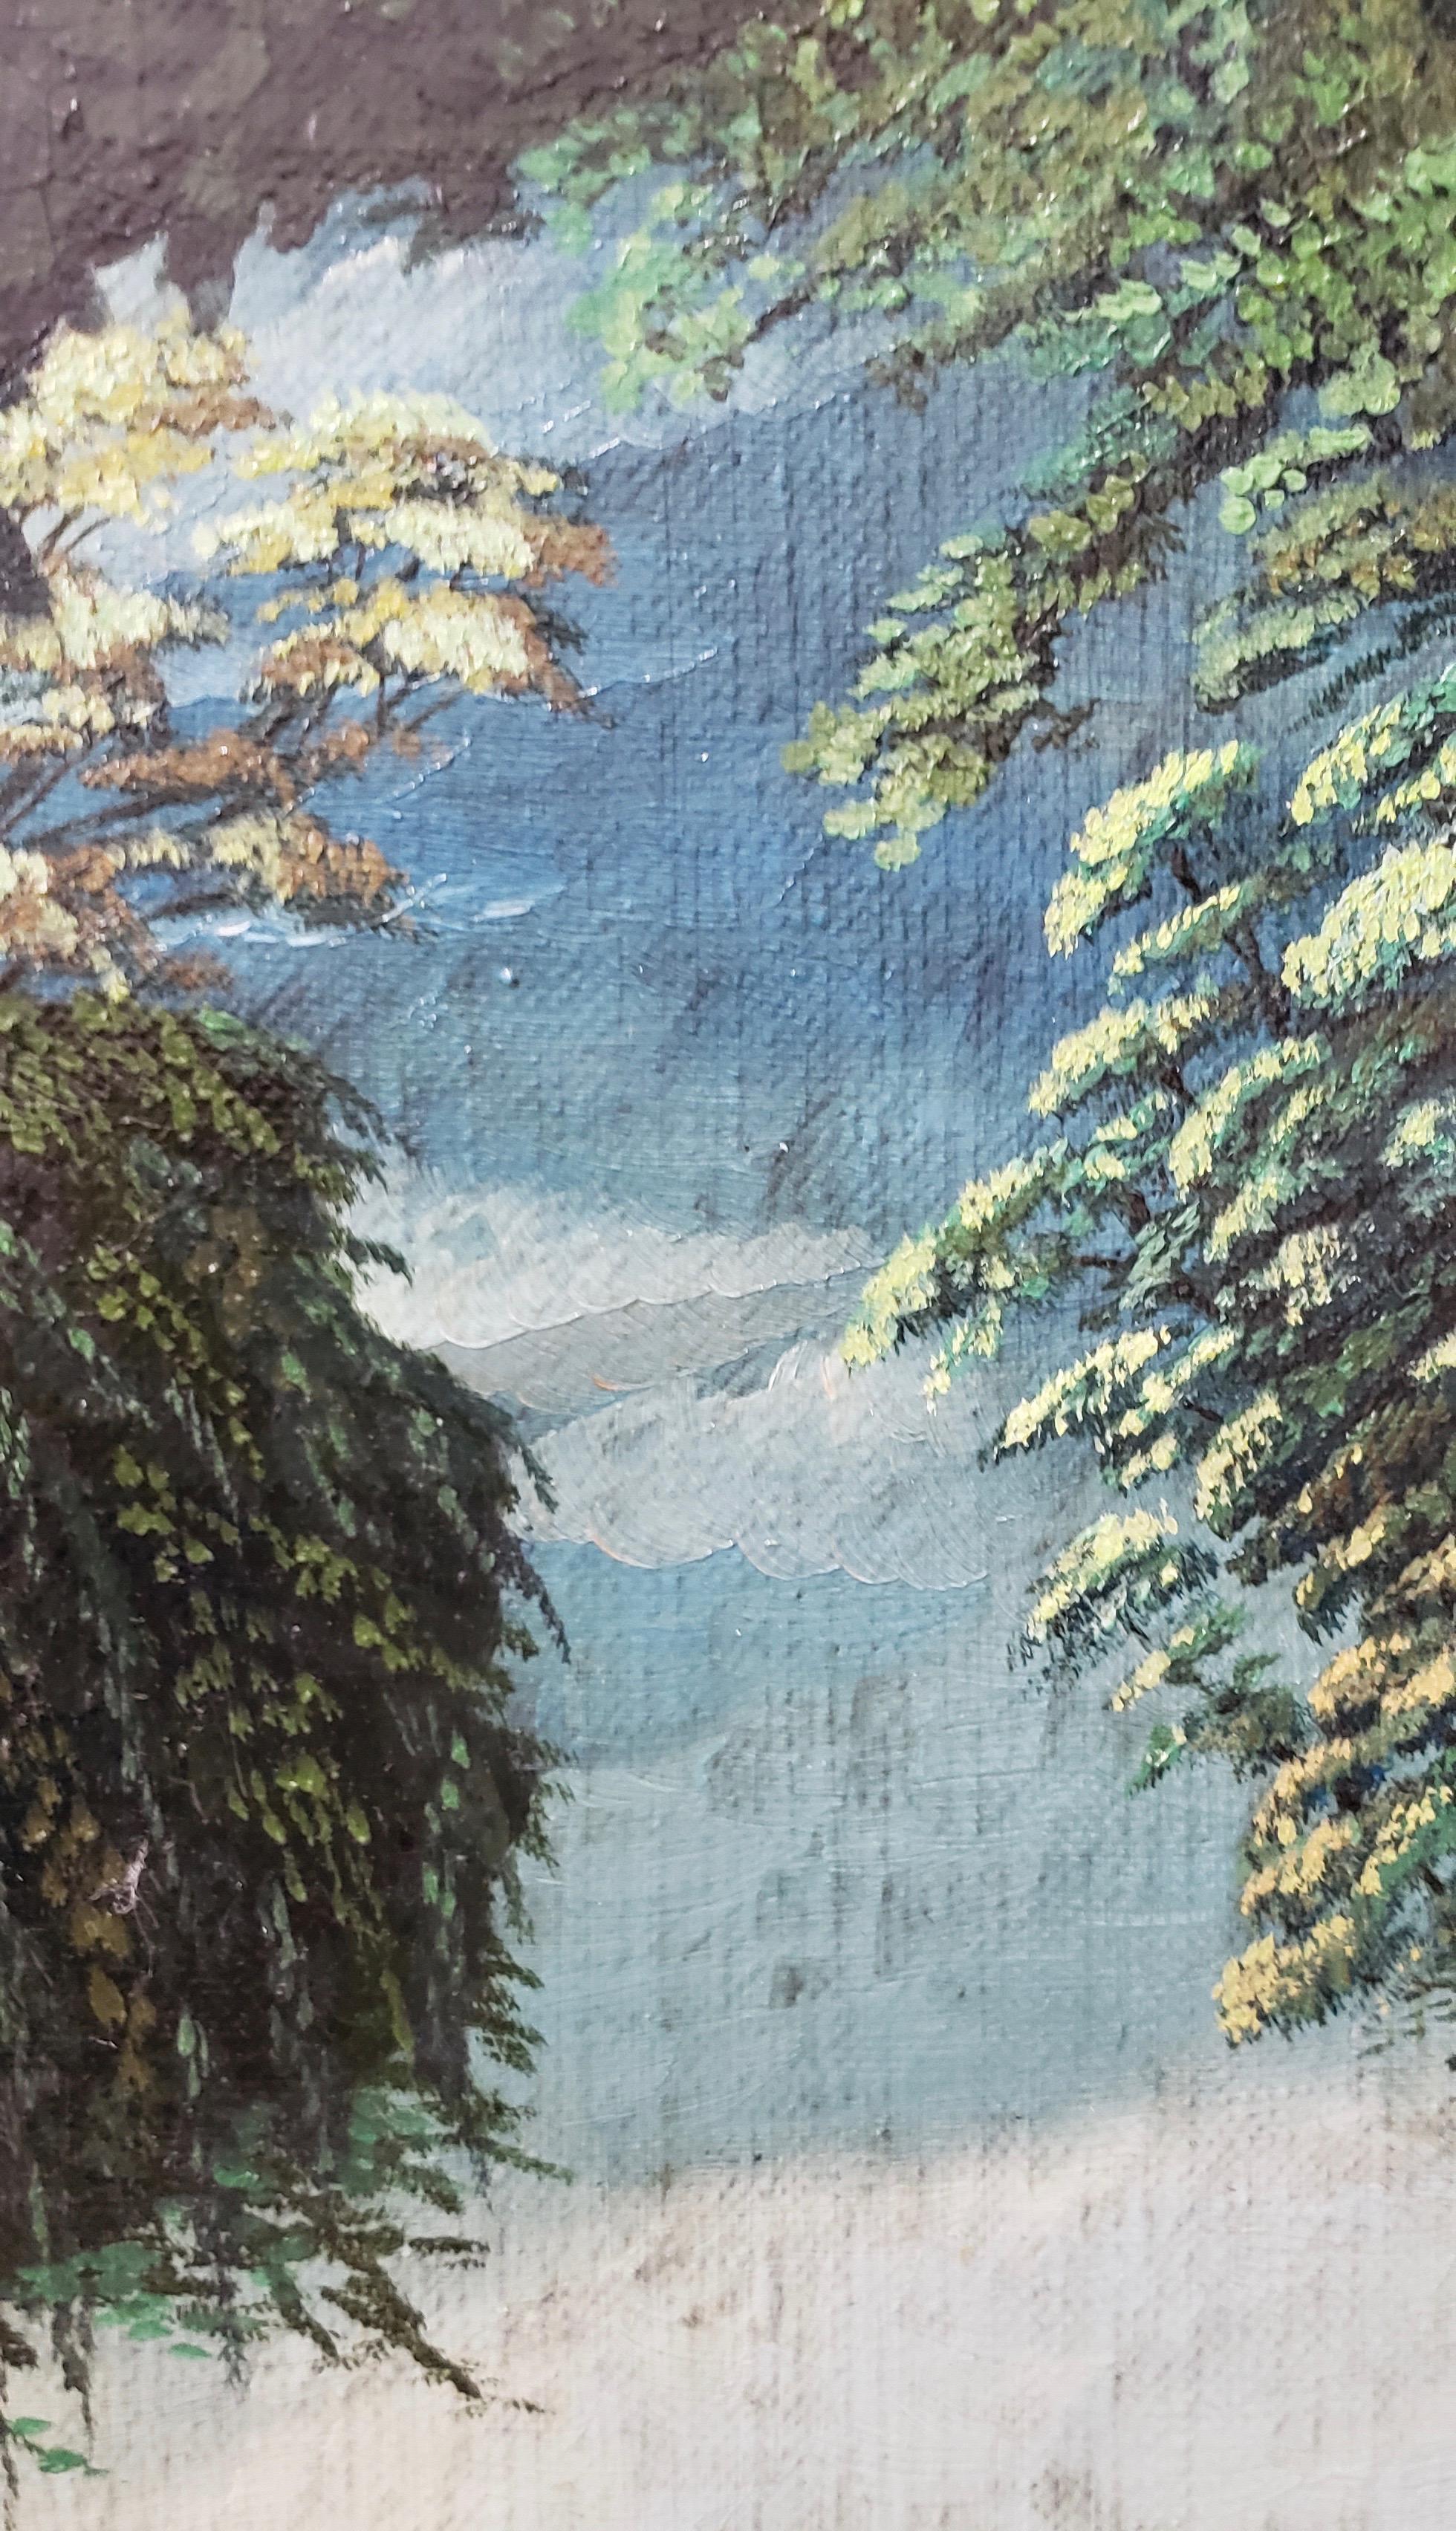 Classical Sculptures Overlooking a Lush Country Landscape Oil Painting c.1950s For Sale 4